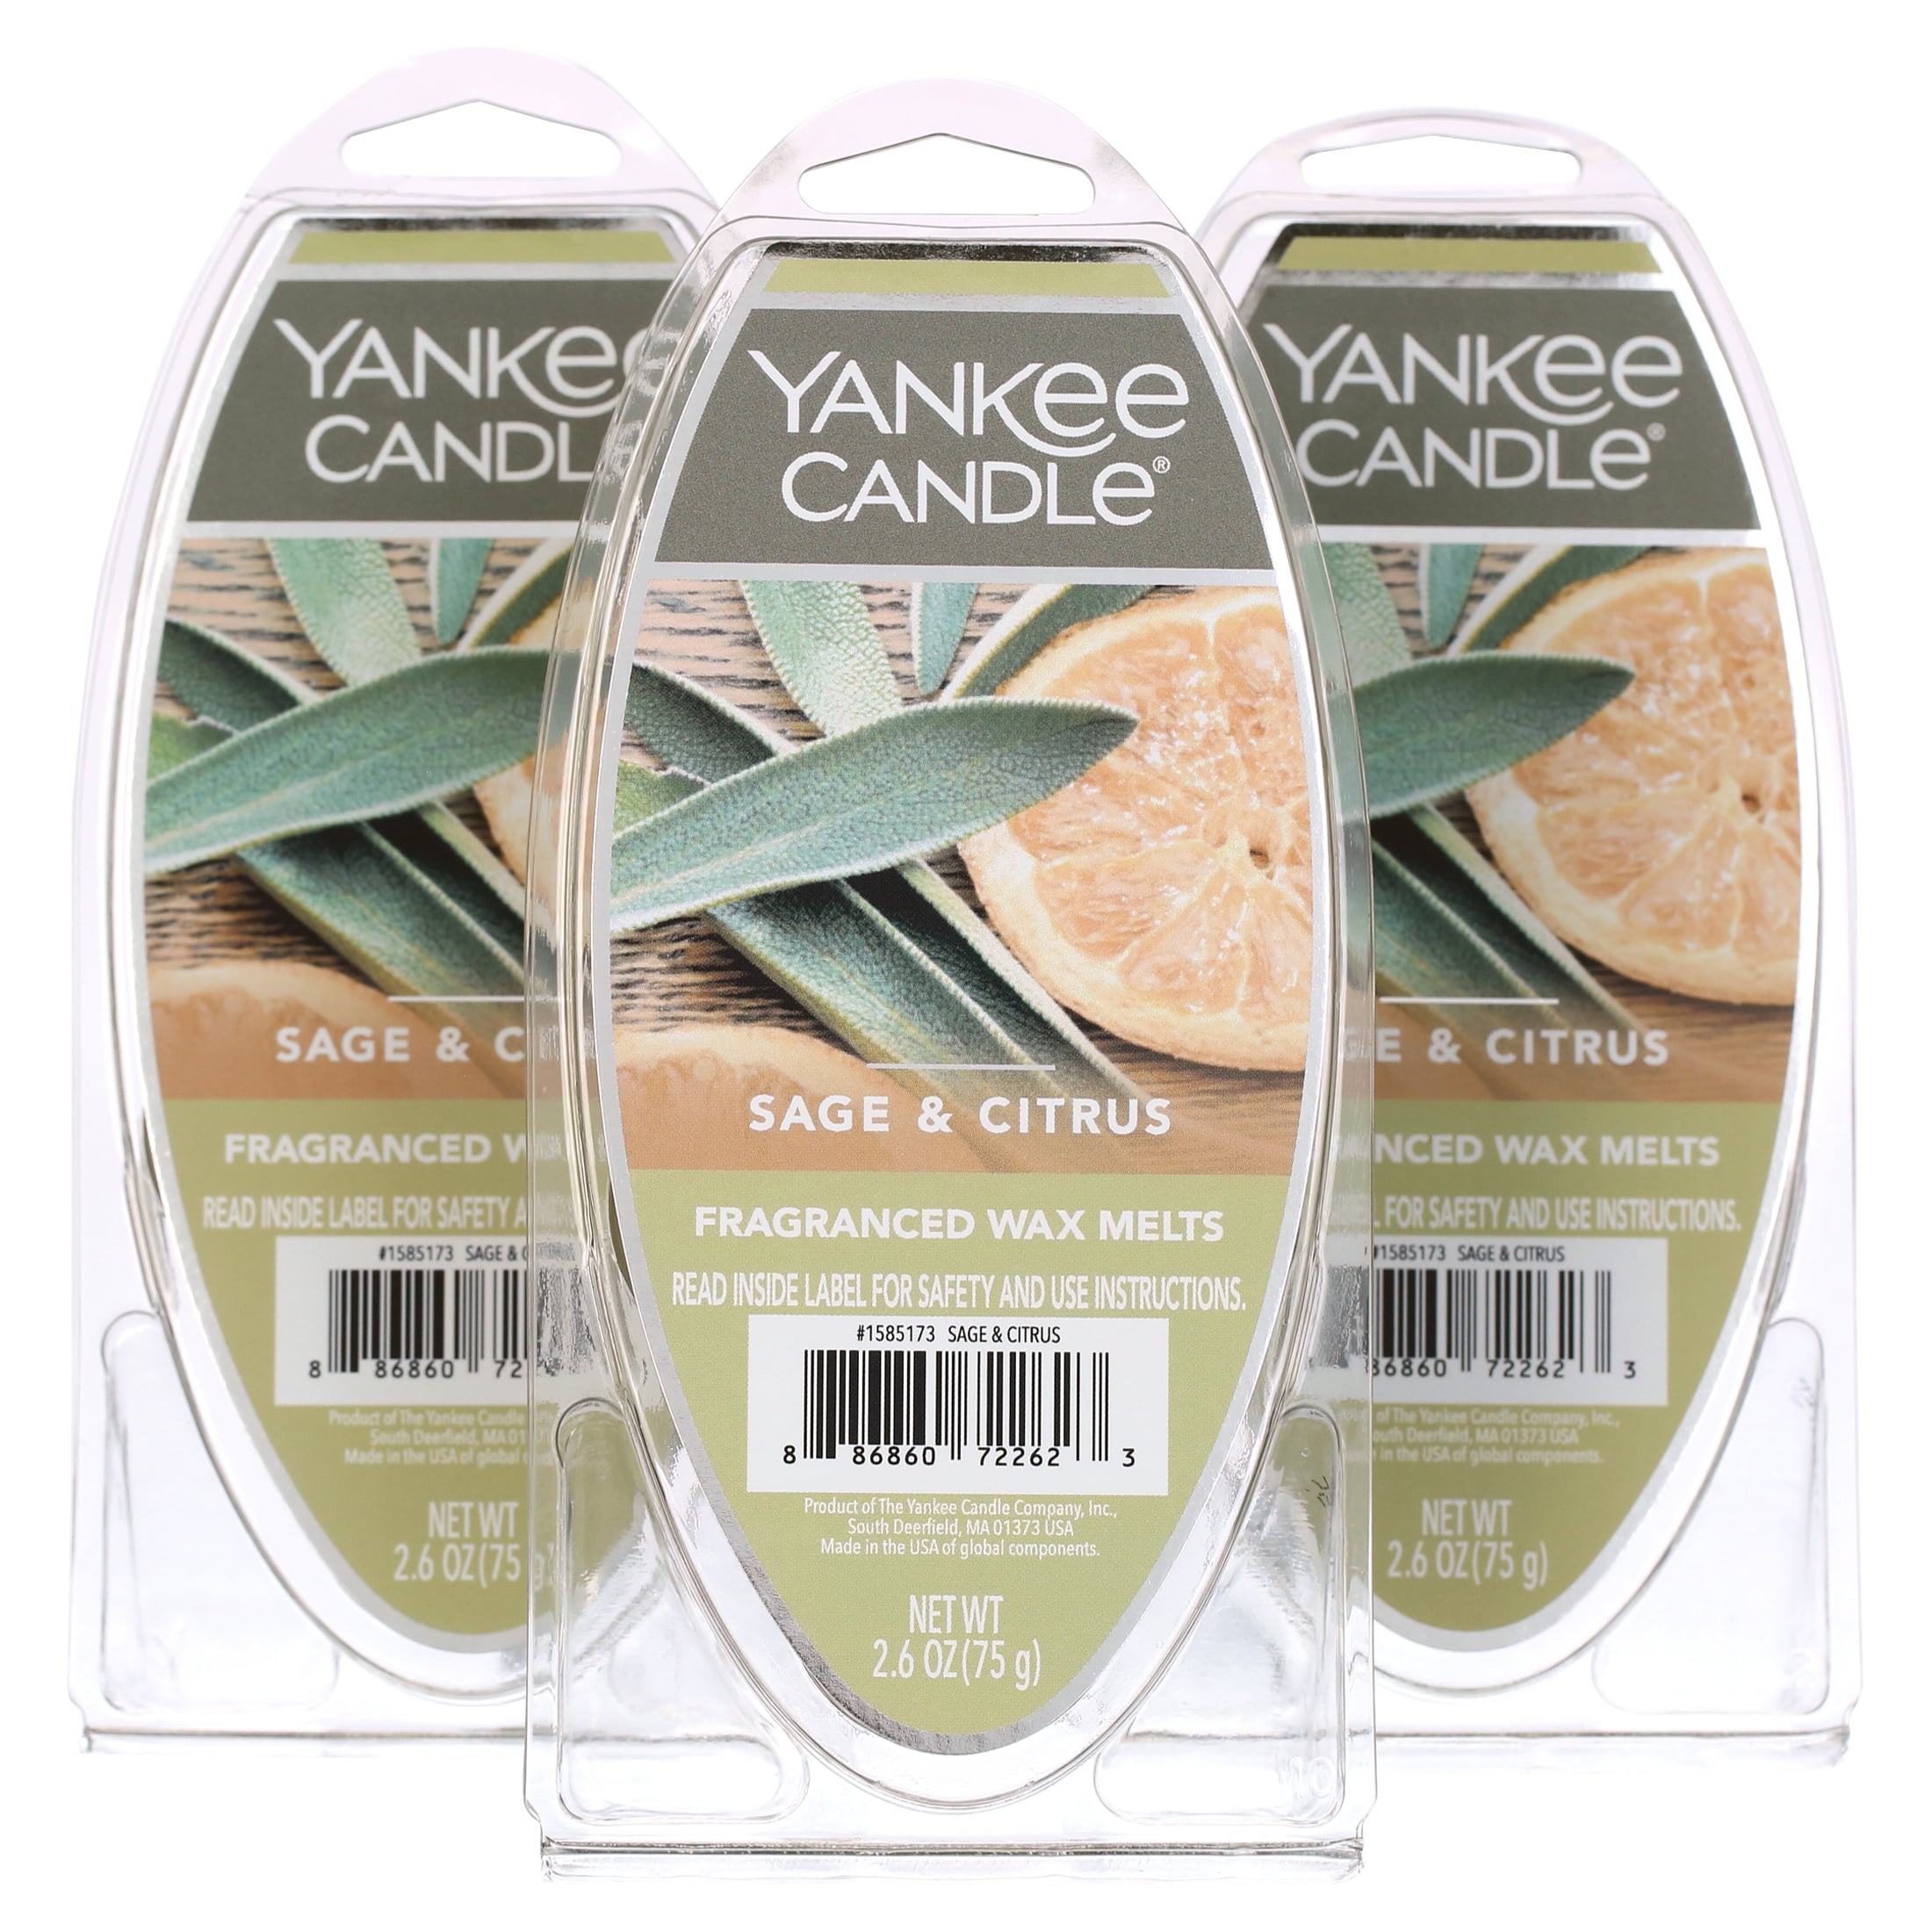 Yankee candle wax melts • Compare & see prices now »